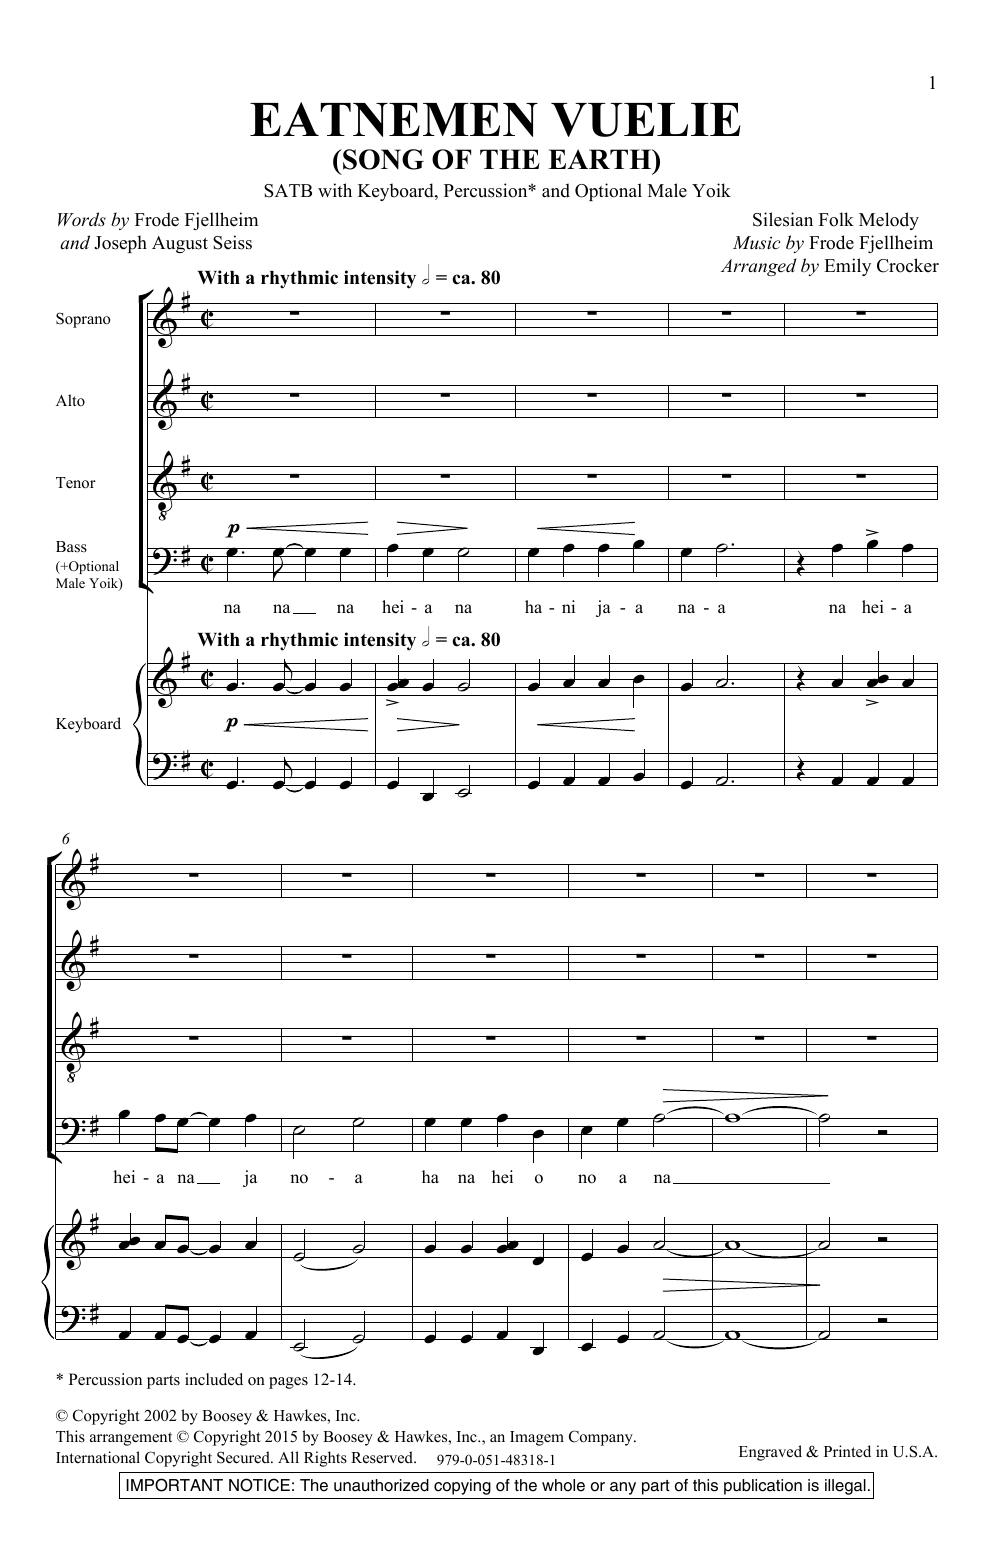 Frode Fjellheim Eatnemen Vuelie (Song Of The Earth) (arr. Emily Crocker) sheet music notes and chords. Download Printable PDF.